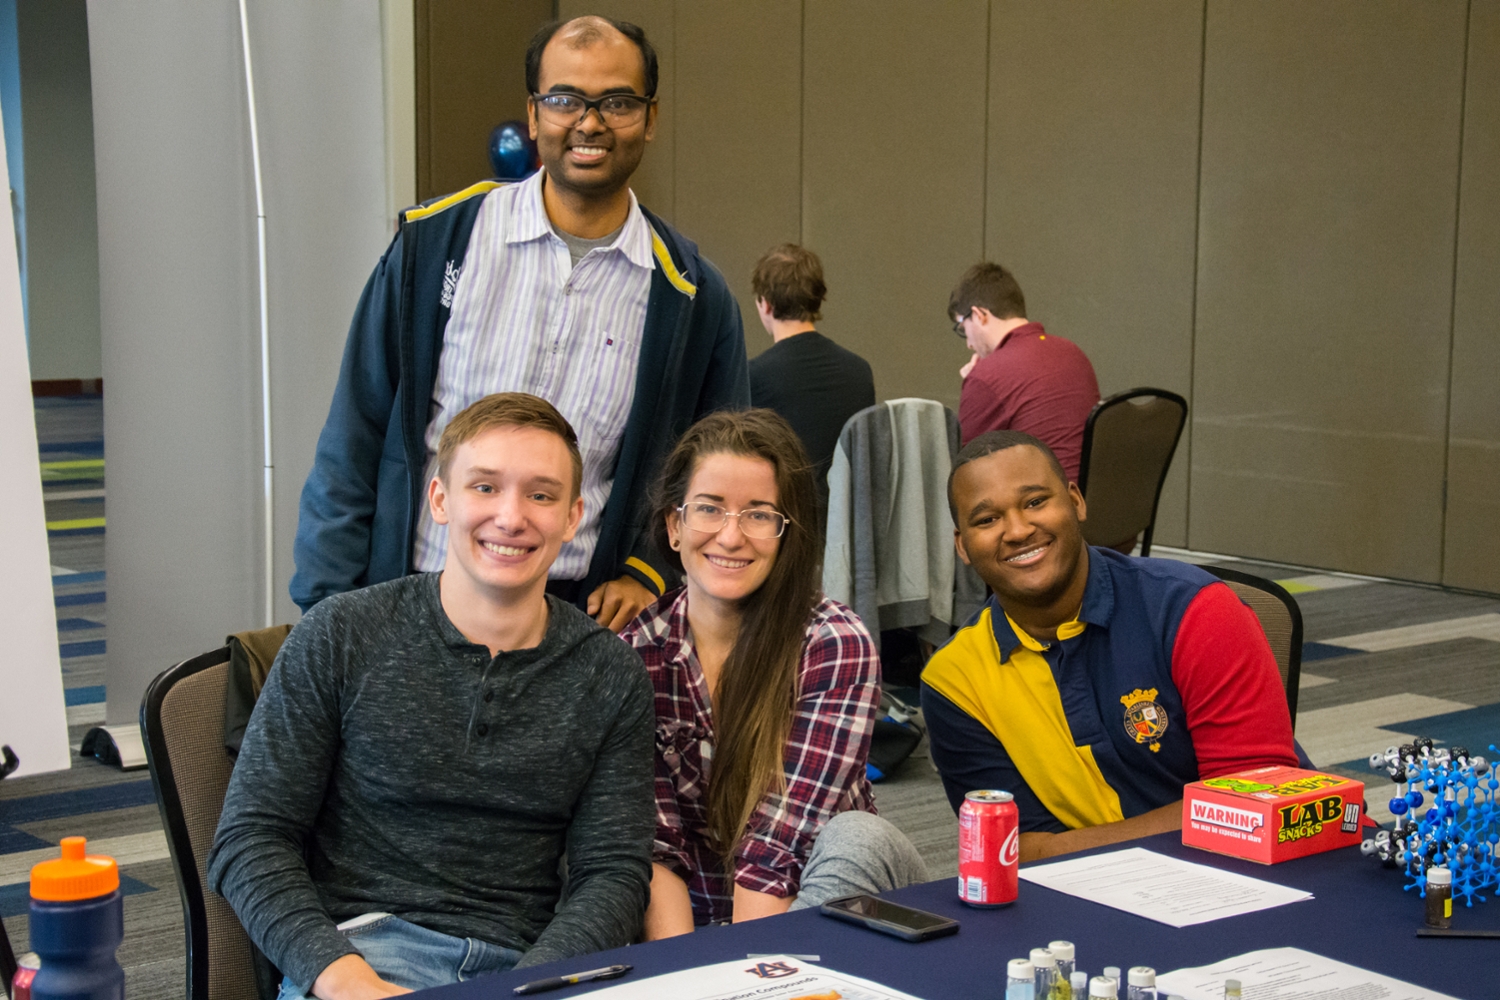 Students at the February 2019 Research Fair.